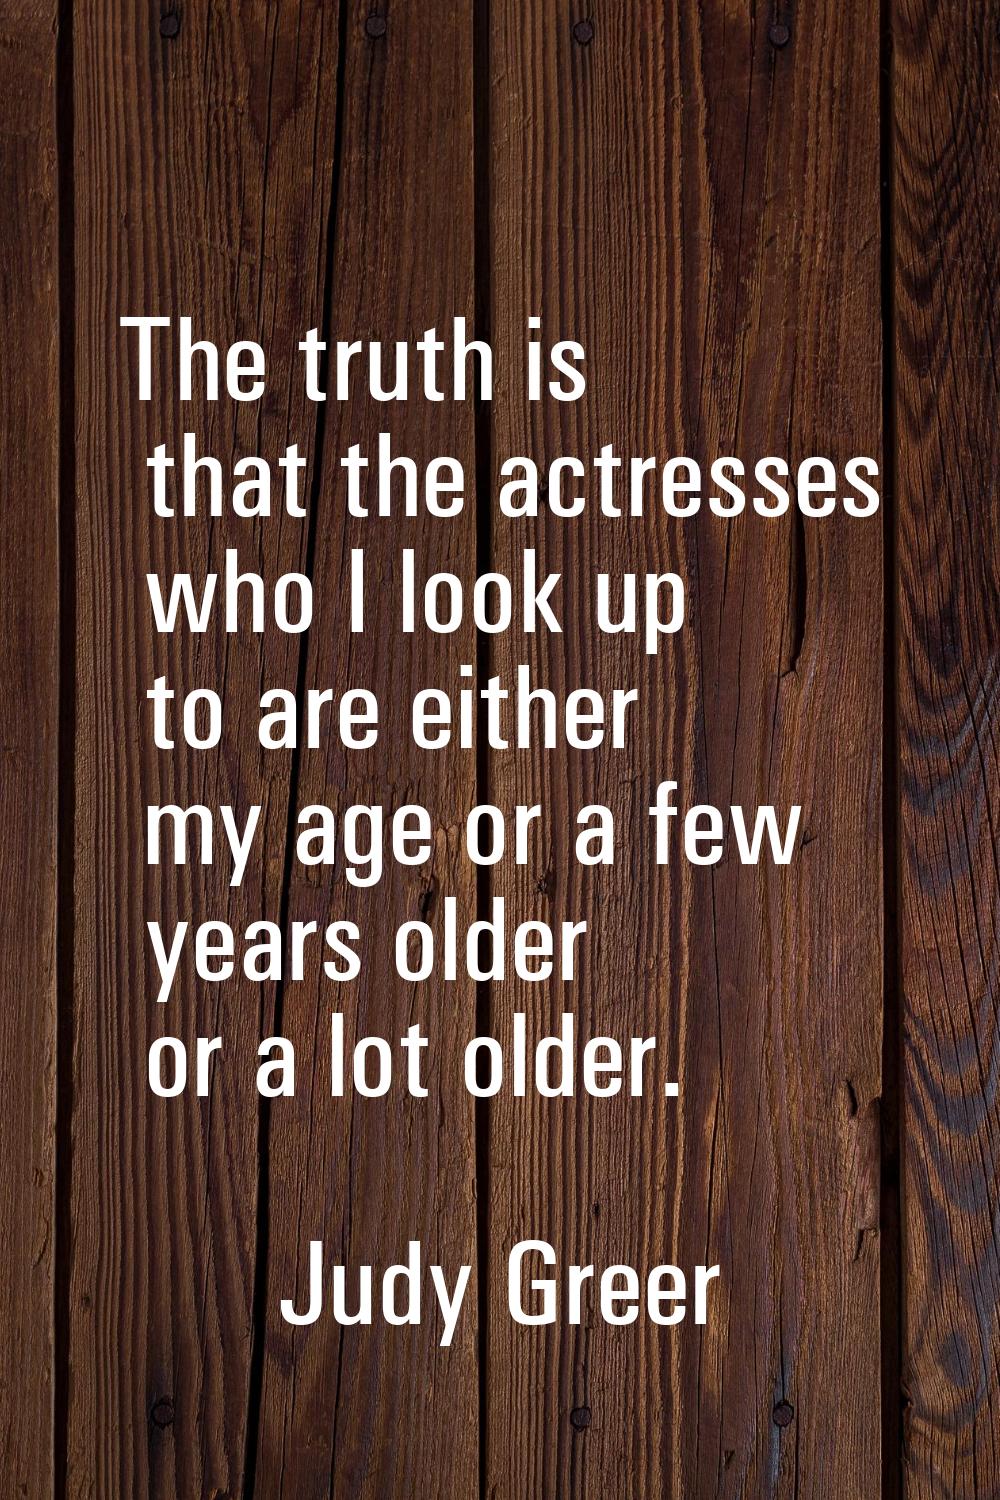 The truth is that the actresses who I look up to are either my age or a few years older or a lot ol